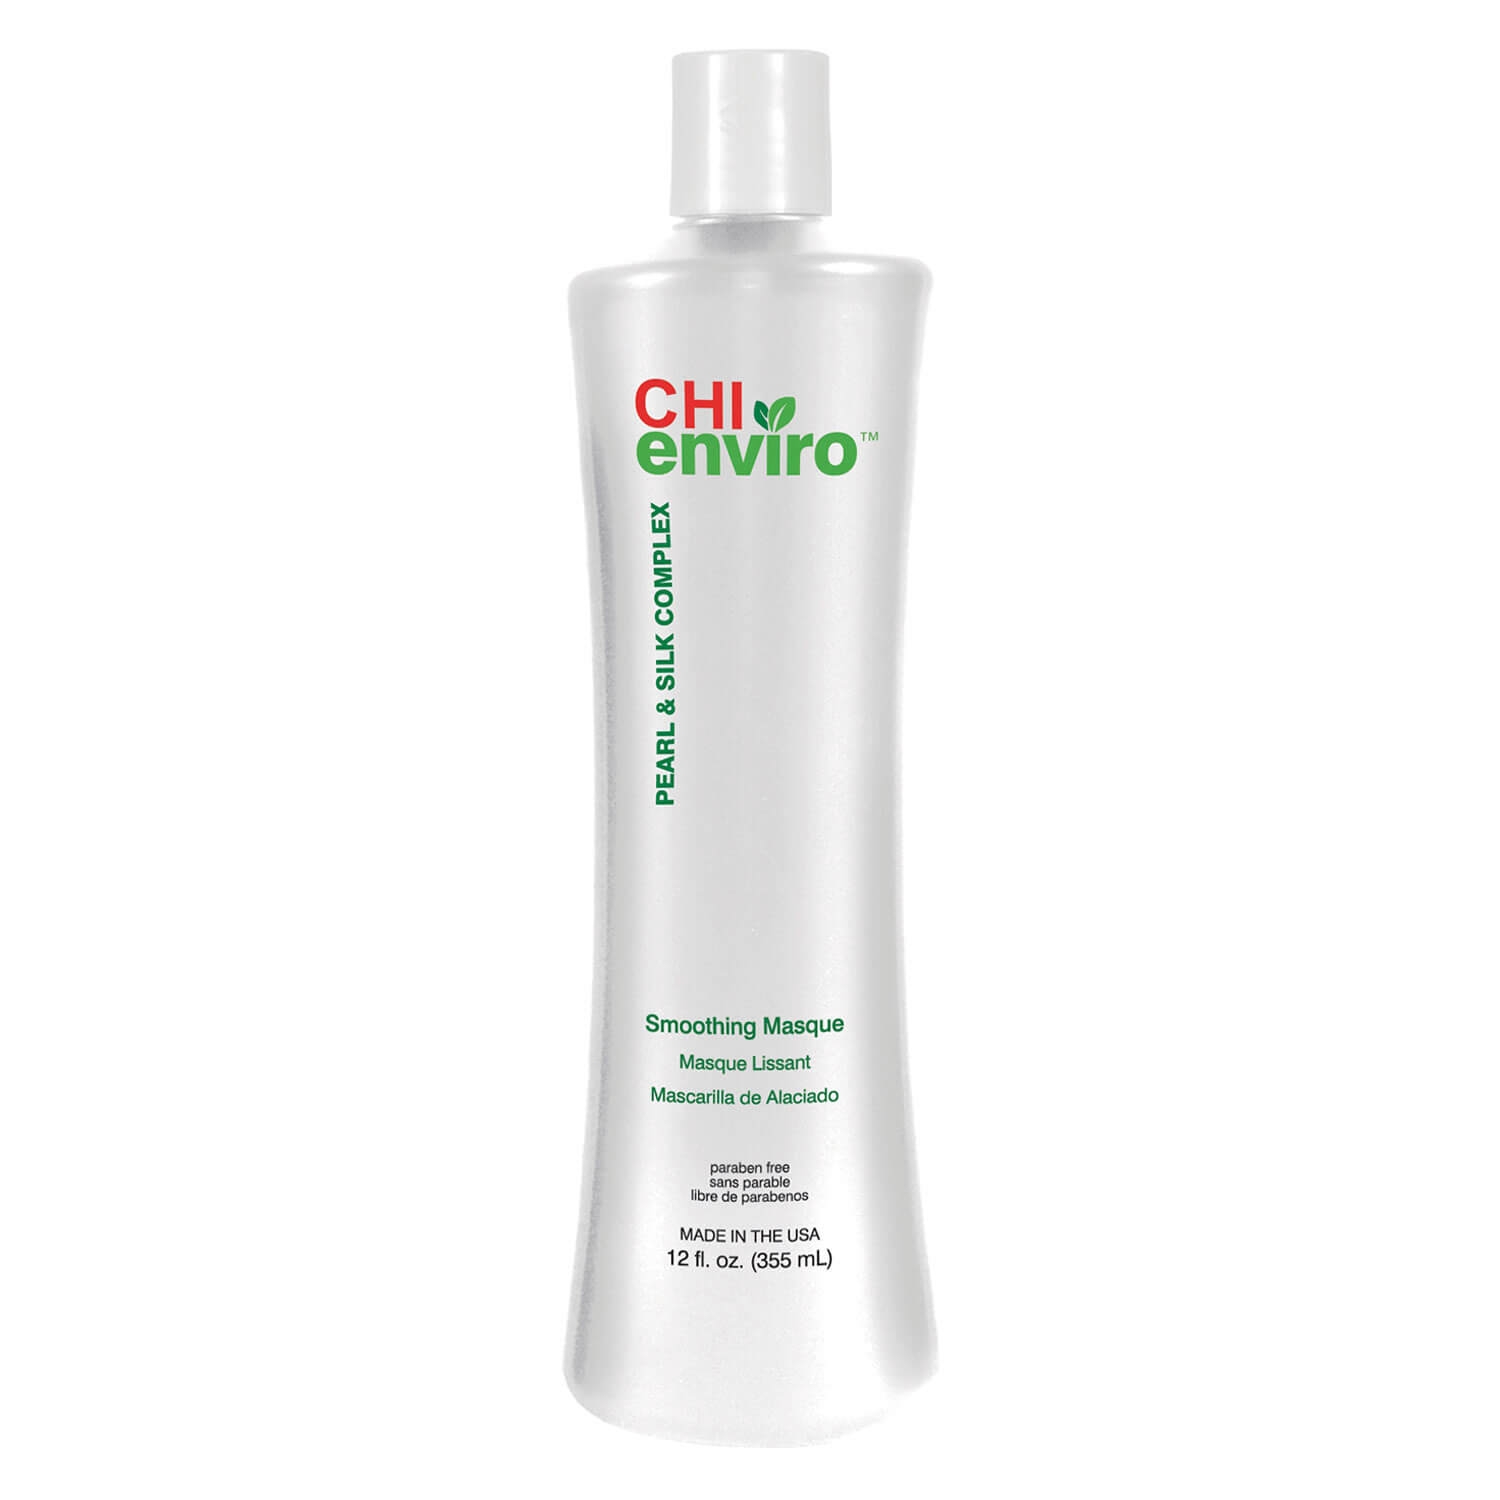 Product image from CHI enviro - Smoothing Masque